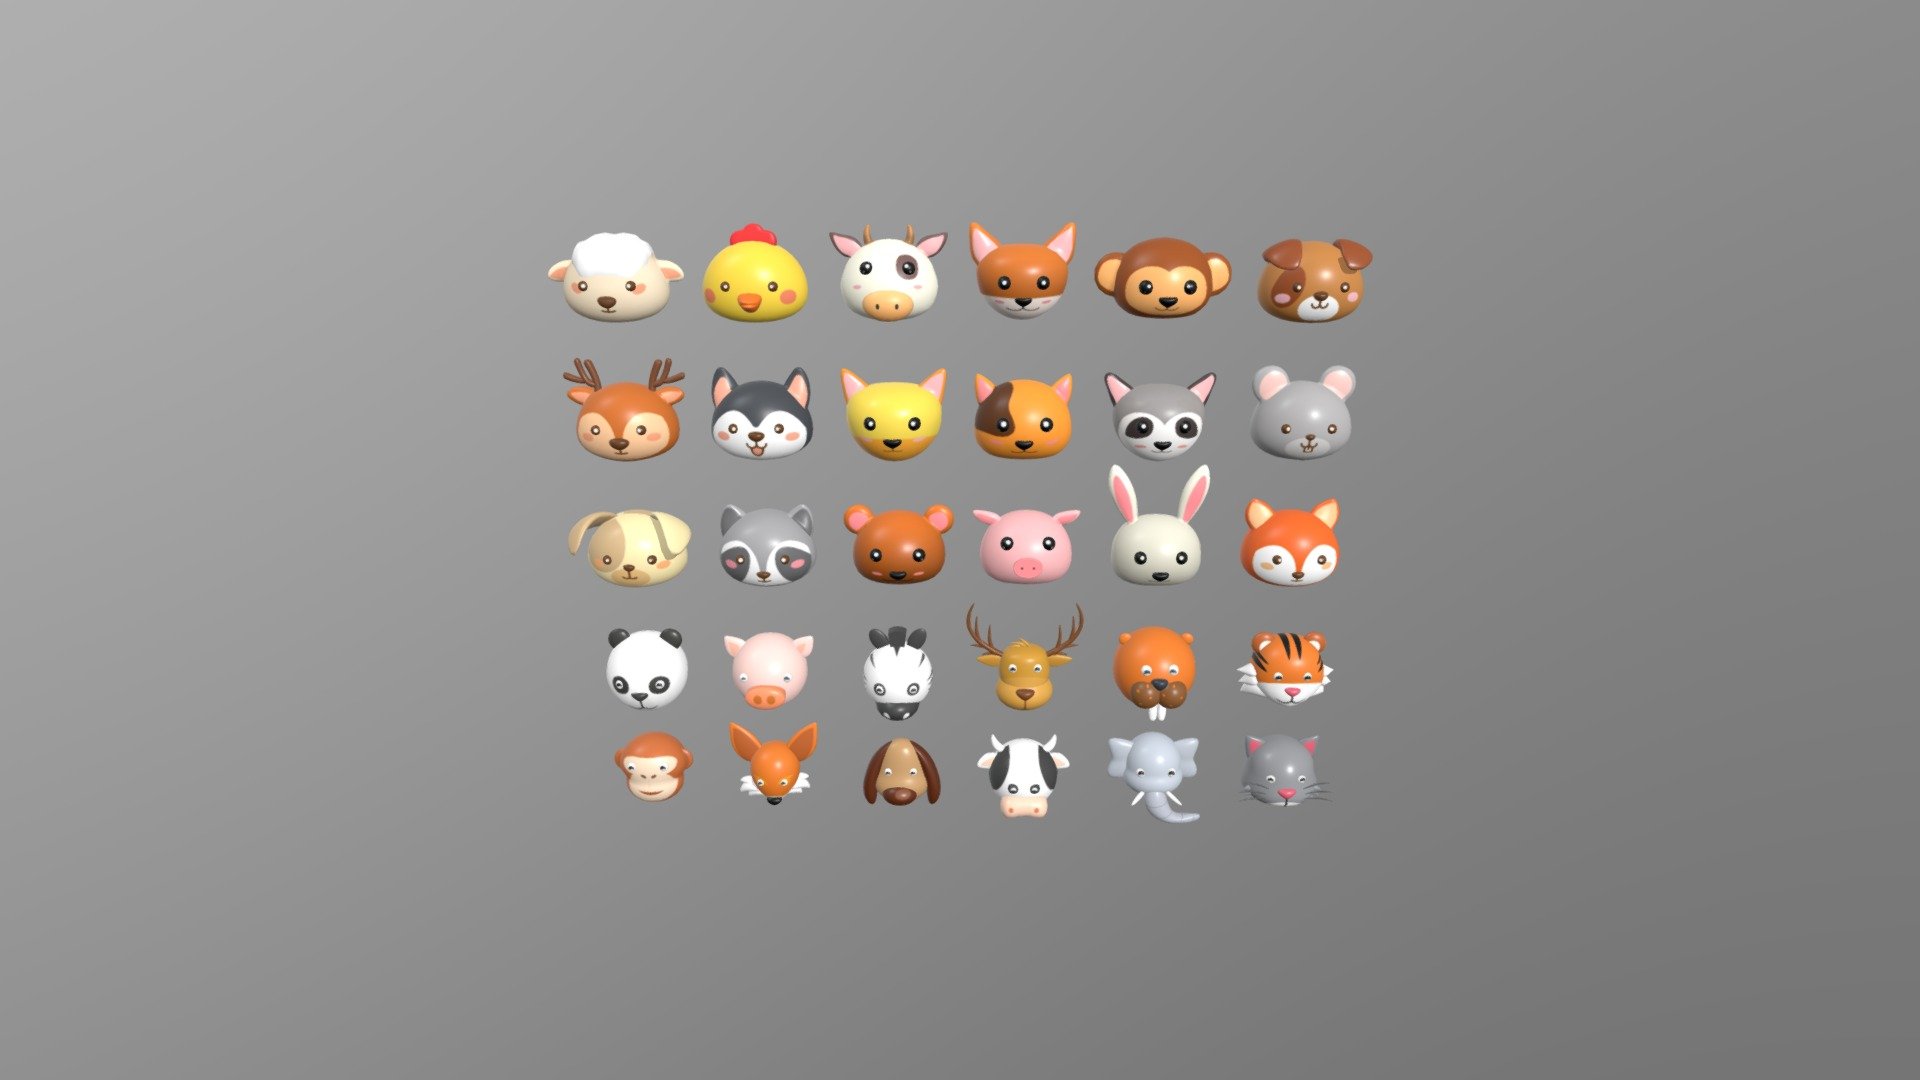 Animal Head Pack 001 3d model.

This pack includes 30 animal face models. These product samples are very good for making games, ar, vr, web, cartoons, video rendering....

Format :
Blender (3.5)
Maya 2019 (.ma)
Dae
Glb
Fbx
Usdc
Abc
Obj

Clean topology:
No Rig.

Texture : 2048 x 2048 (Basecolor, Normal).
UV does not overlap.
Quadrilateral Grid.

Vertices: 84552
Polygon: 87492

List of animation faces :
Bear
Dog
Cat
Chicken
Cow
Elephant
Fox
Horse
Monkey
Panda
Pig
Rabbit
Deer
Wolf
Horse
Ratel
Sea Lion
Sheep
Tiger
Mouse (rat)

I have exported from the model to many supported file formats. Please leave positive feedback if you like this product. Thank you! - Animal Head Pack 001 - 3D model by MayaZ (@linhleend) 3d model